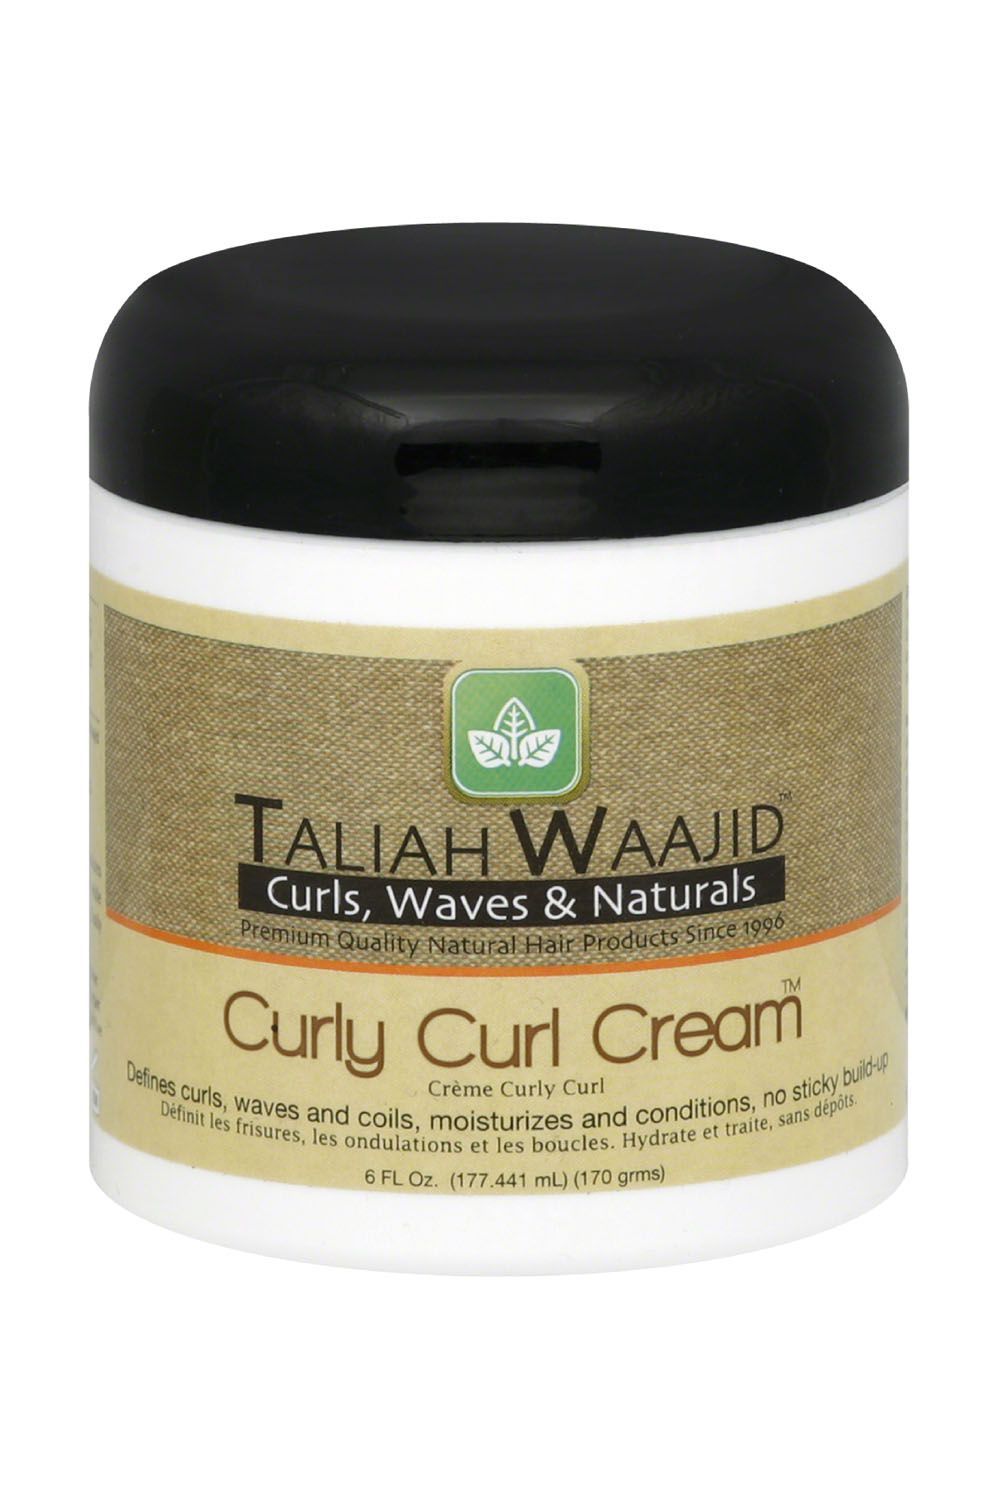 13 Best Curl Creams for Natural Hair - Best Curly Hair ...